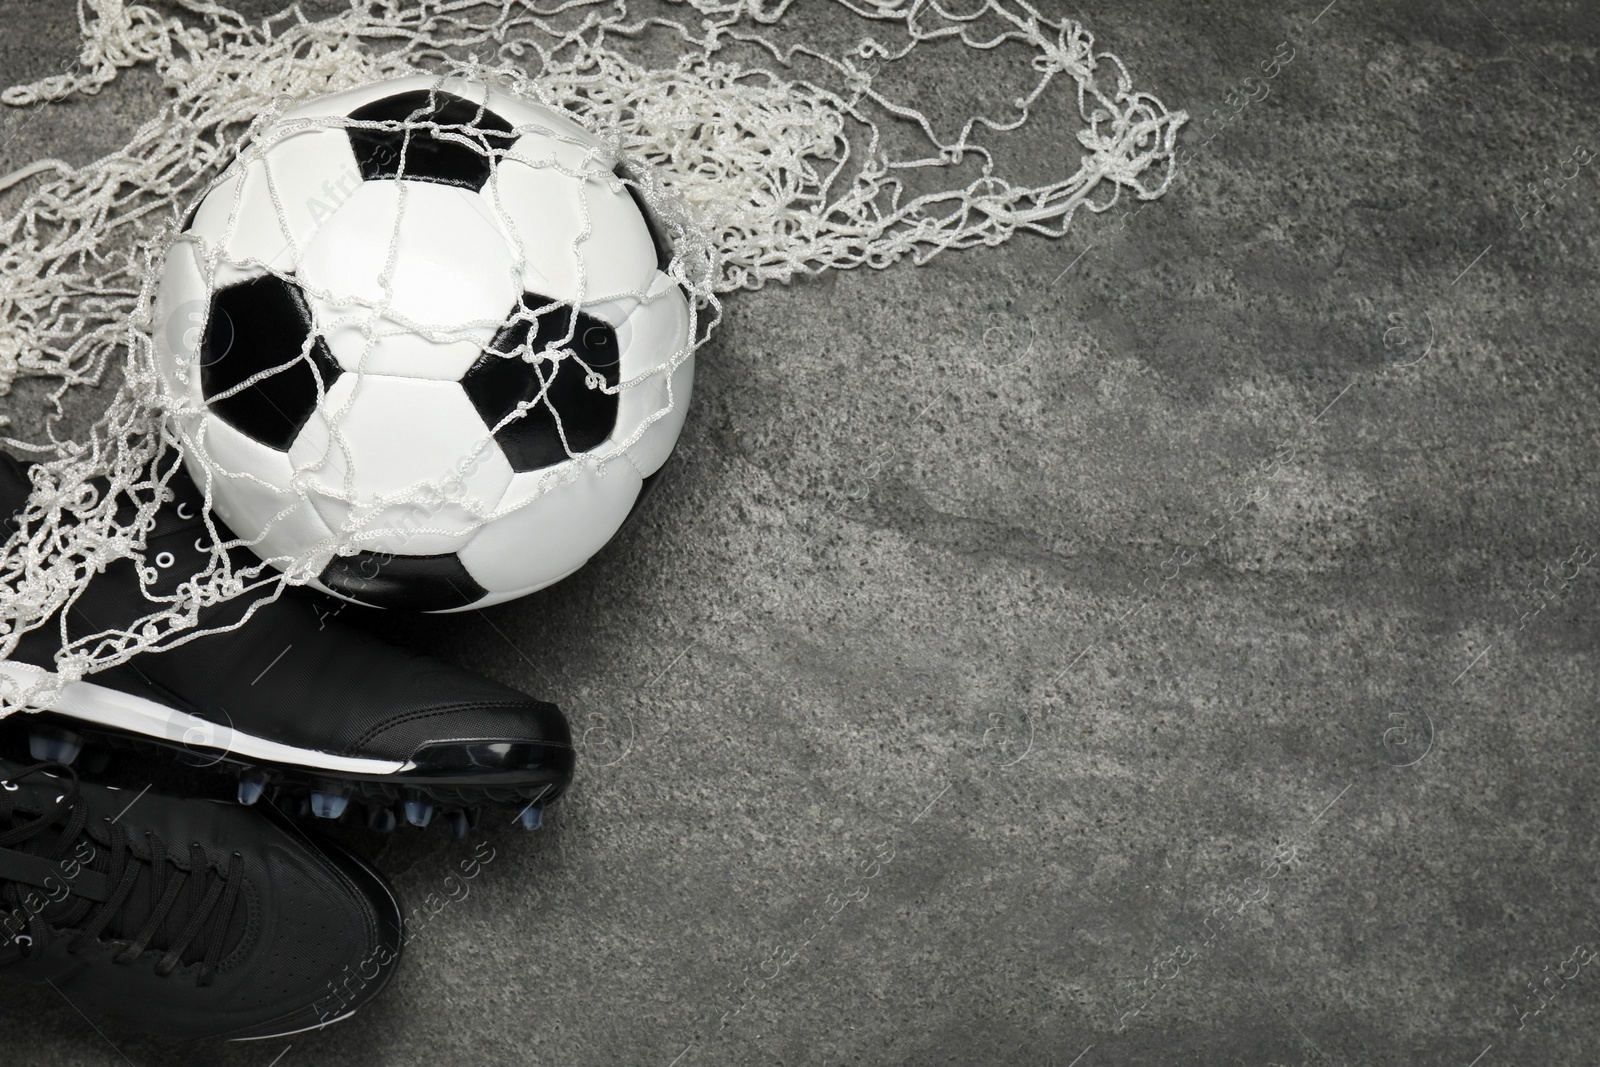 Photo of Sports equipment. Soccer ball, net and sneakers on grey textured table, flat lay. Space for text